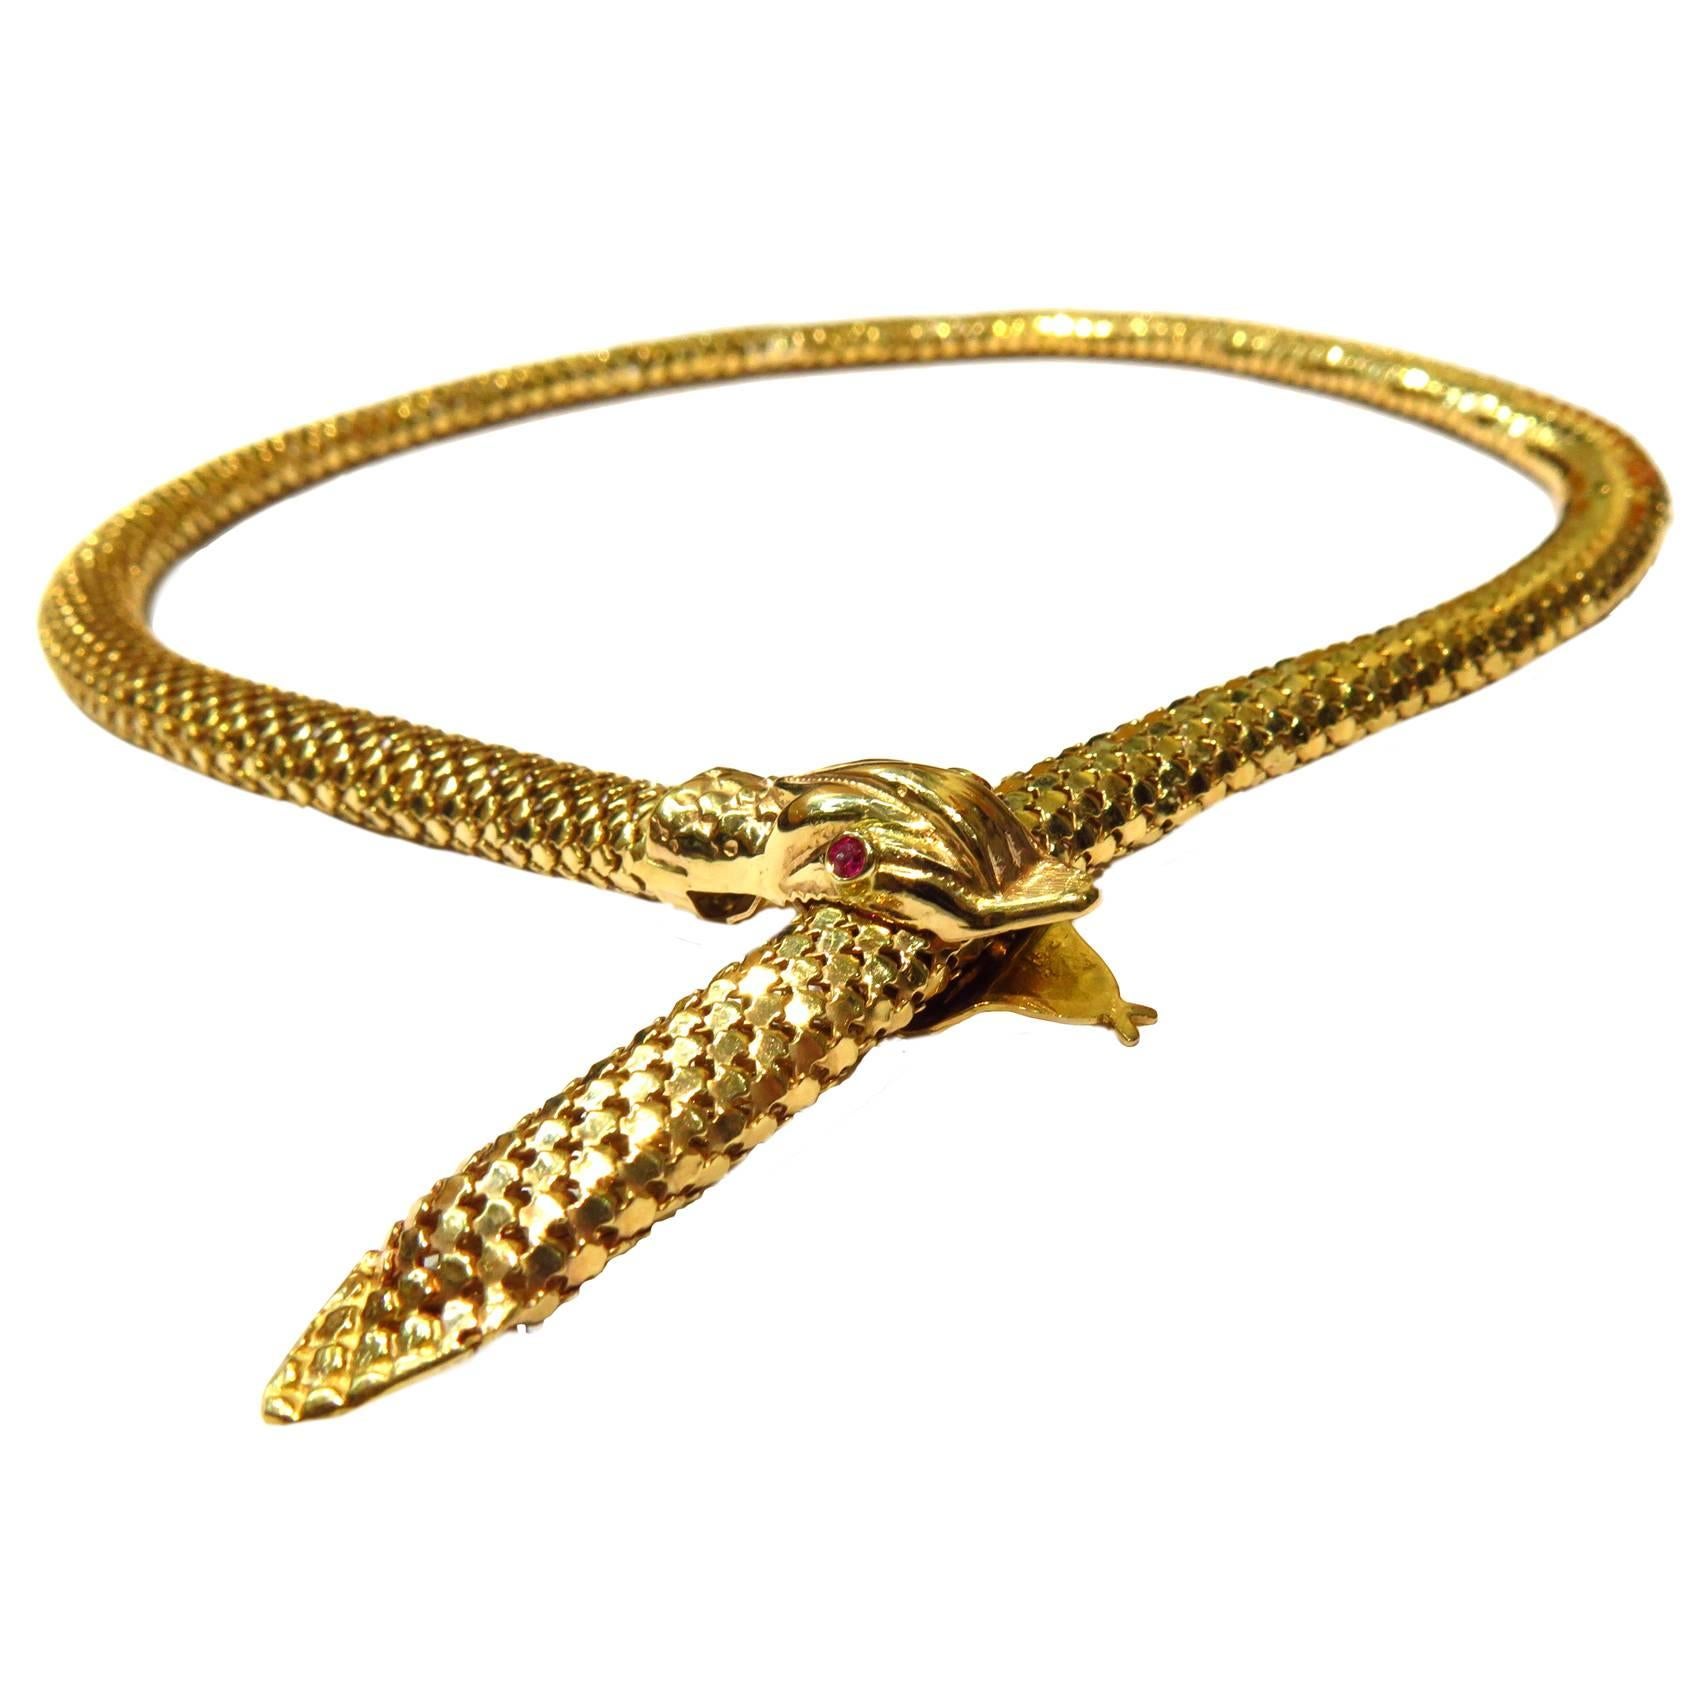 Exceptional Adjustable Flexible Ruby Gold Snake Necklace 